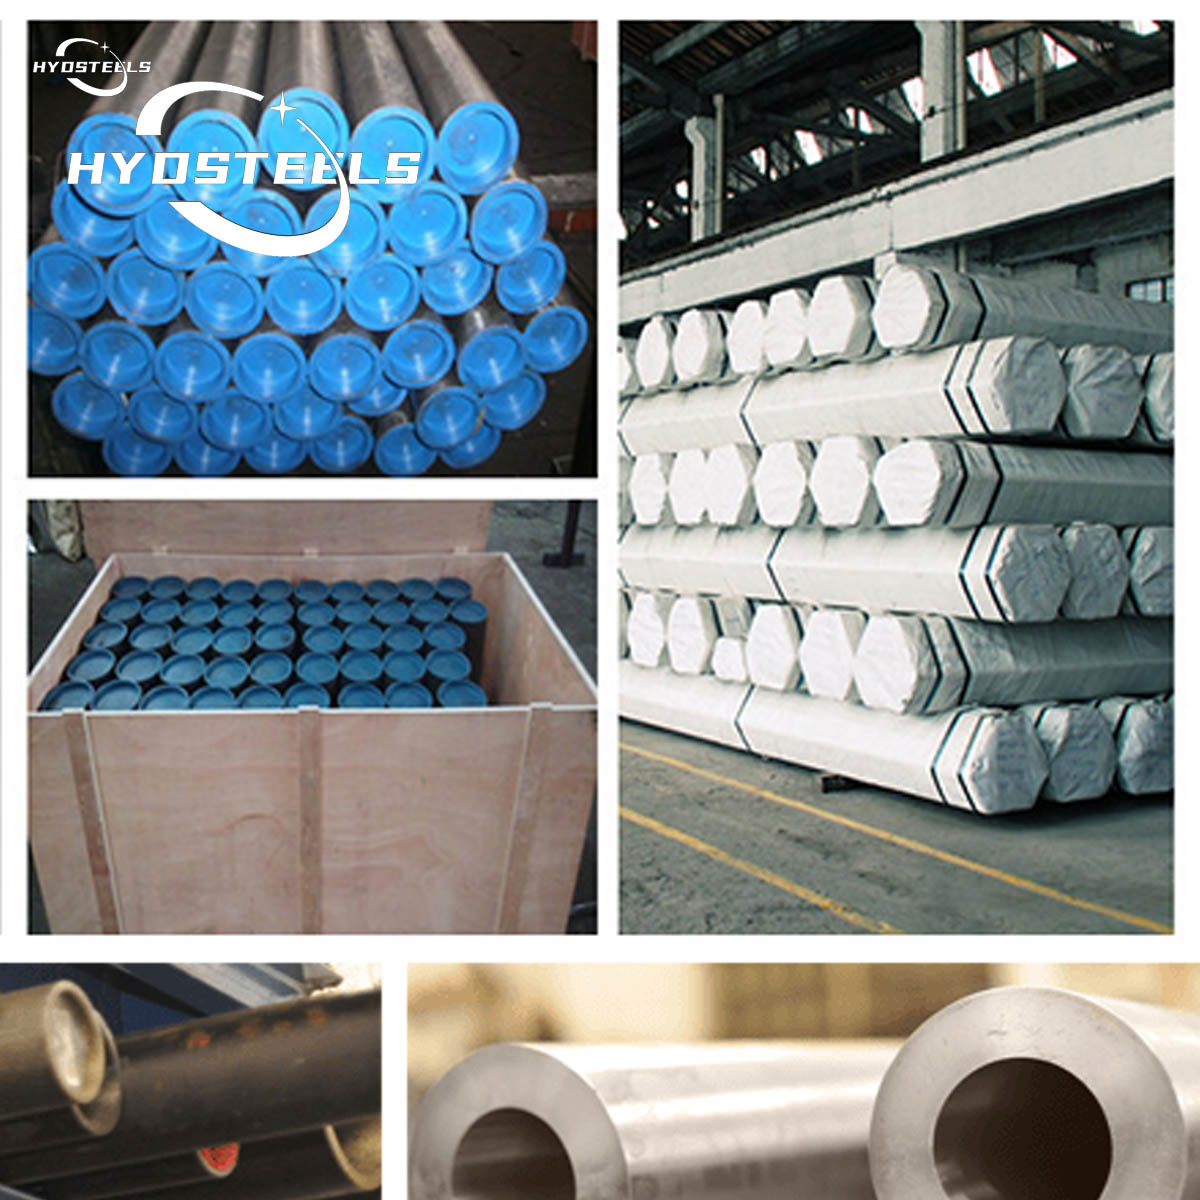 Standard hydraulic cylinder honing tube material